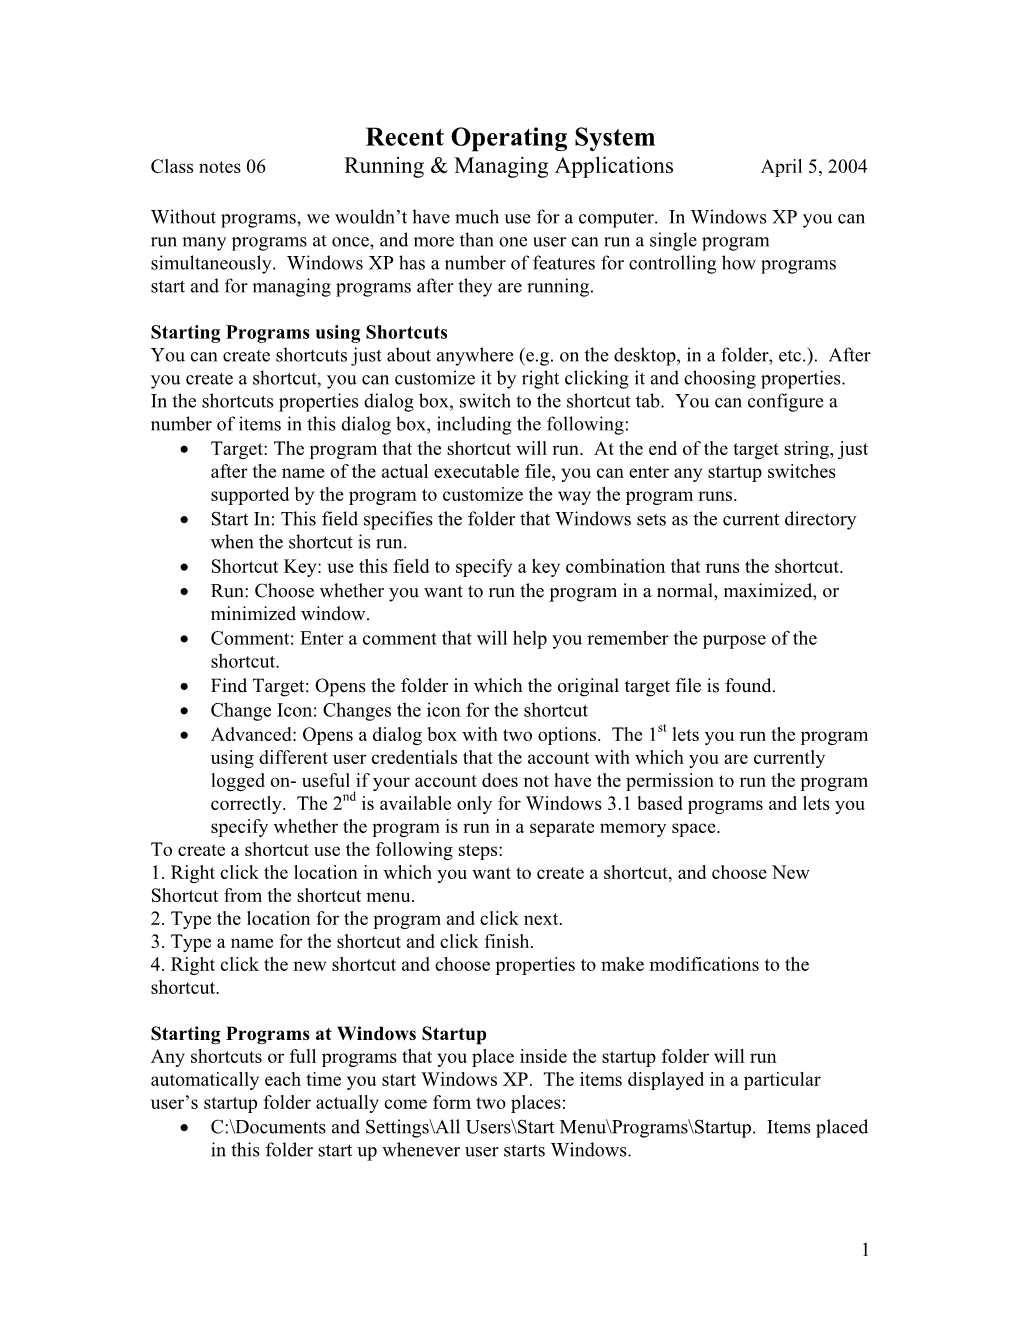 Recent Operating System Class Notes 06 Running & Managing Applications April 5, 2004